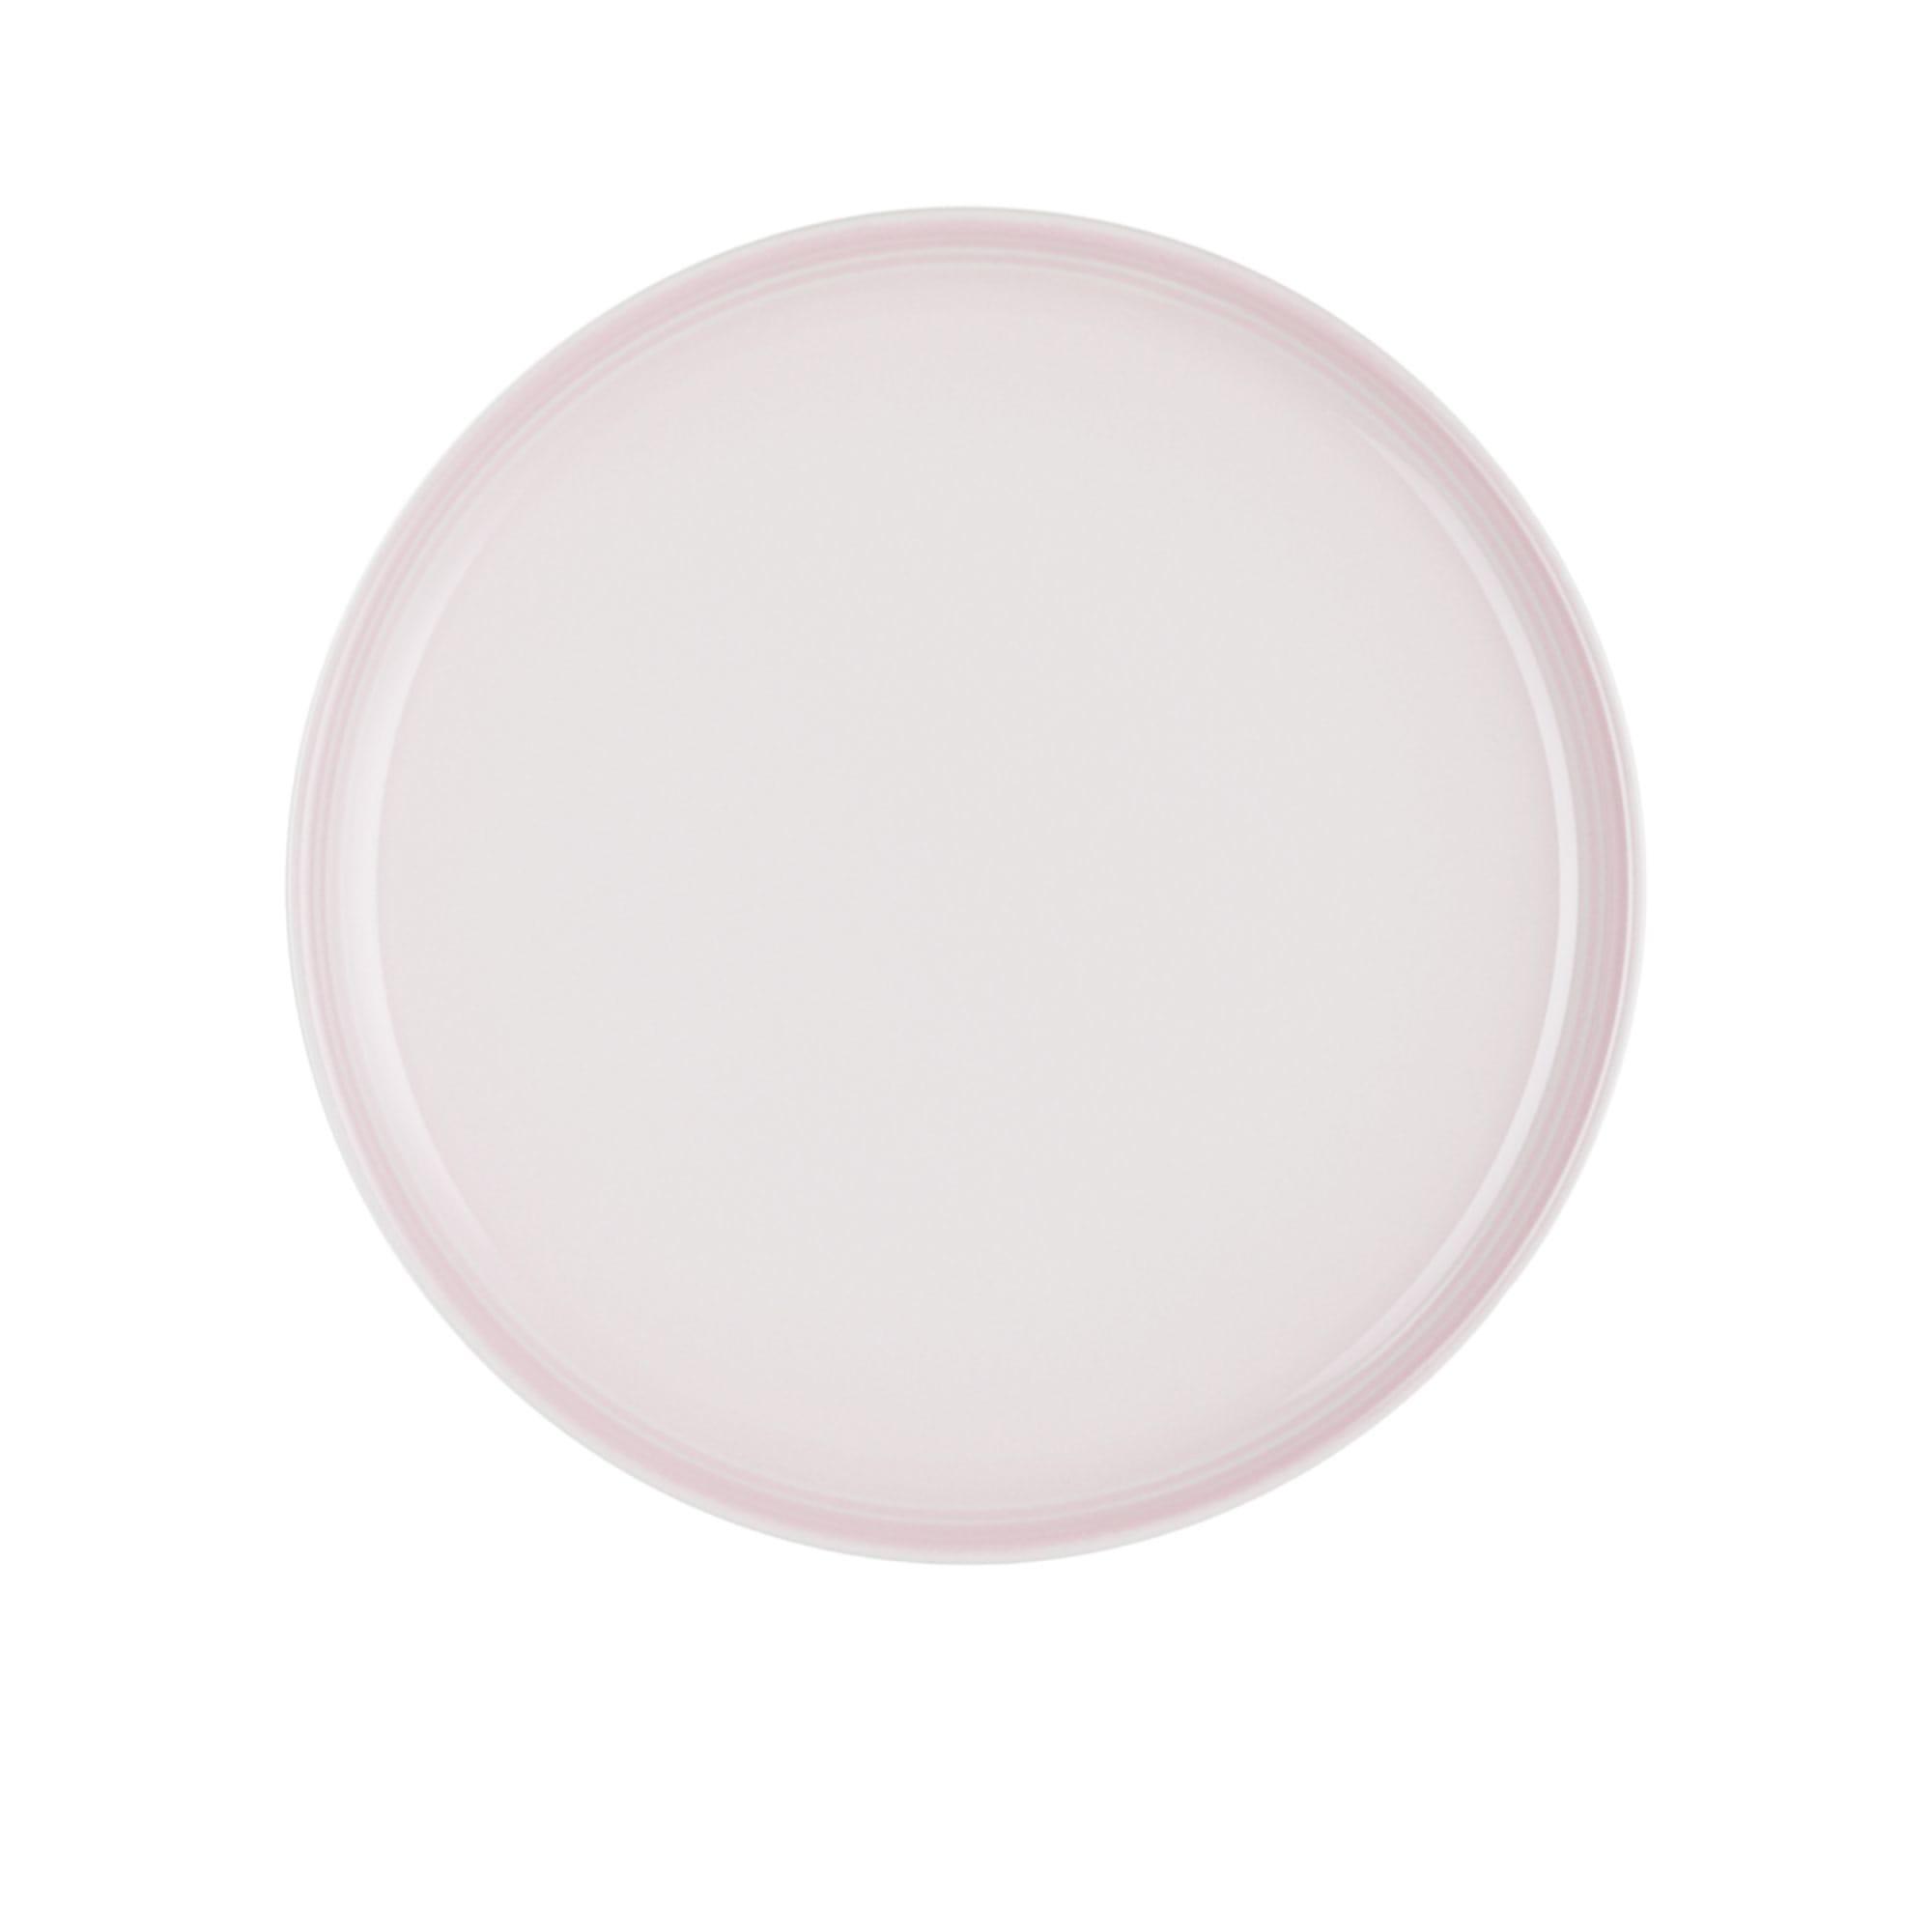 Le Creuset Stoneware Coupe Salad Plate 22cm Shell Pink Image 10